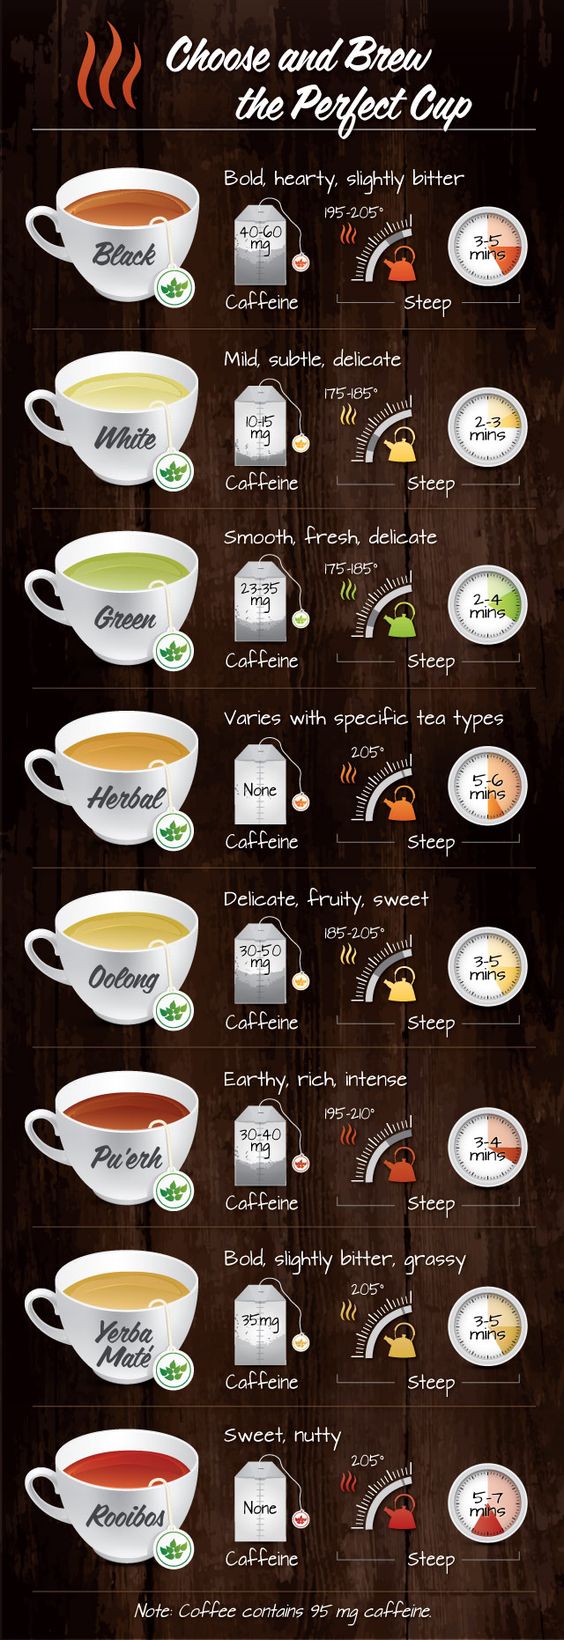 7 Reasons Why You Should Drink Tea Instead of Coffee